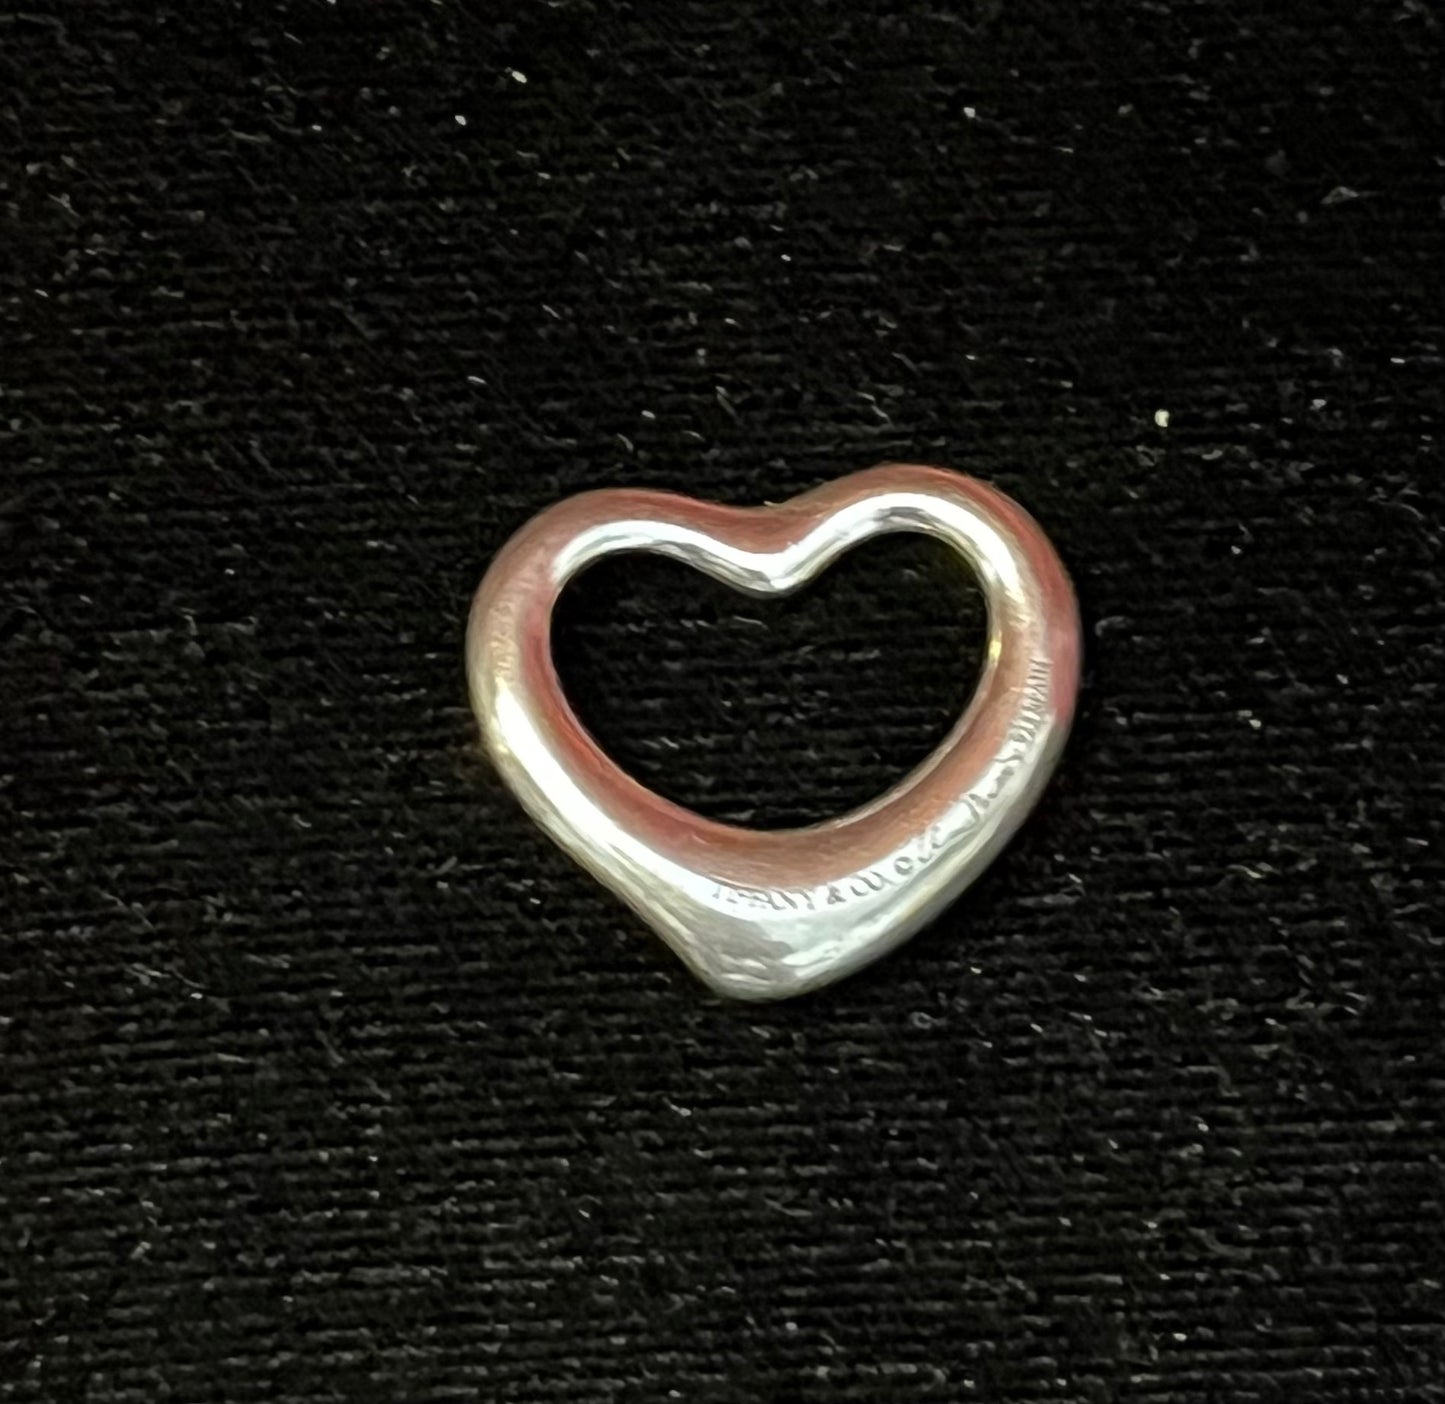 Tiffany & Co Sterling Silver Elsa Peretti Floating Heart Charm-No Box or Pouch